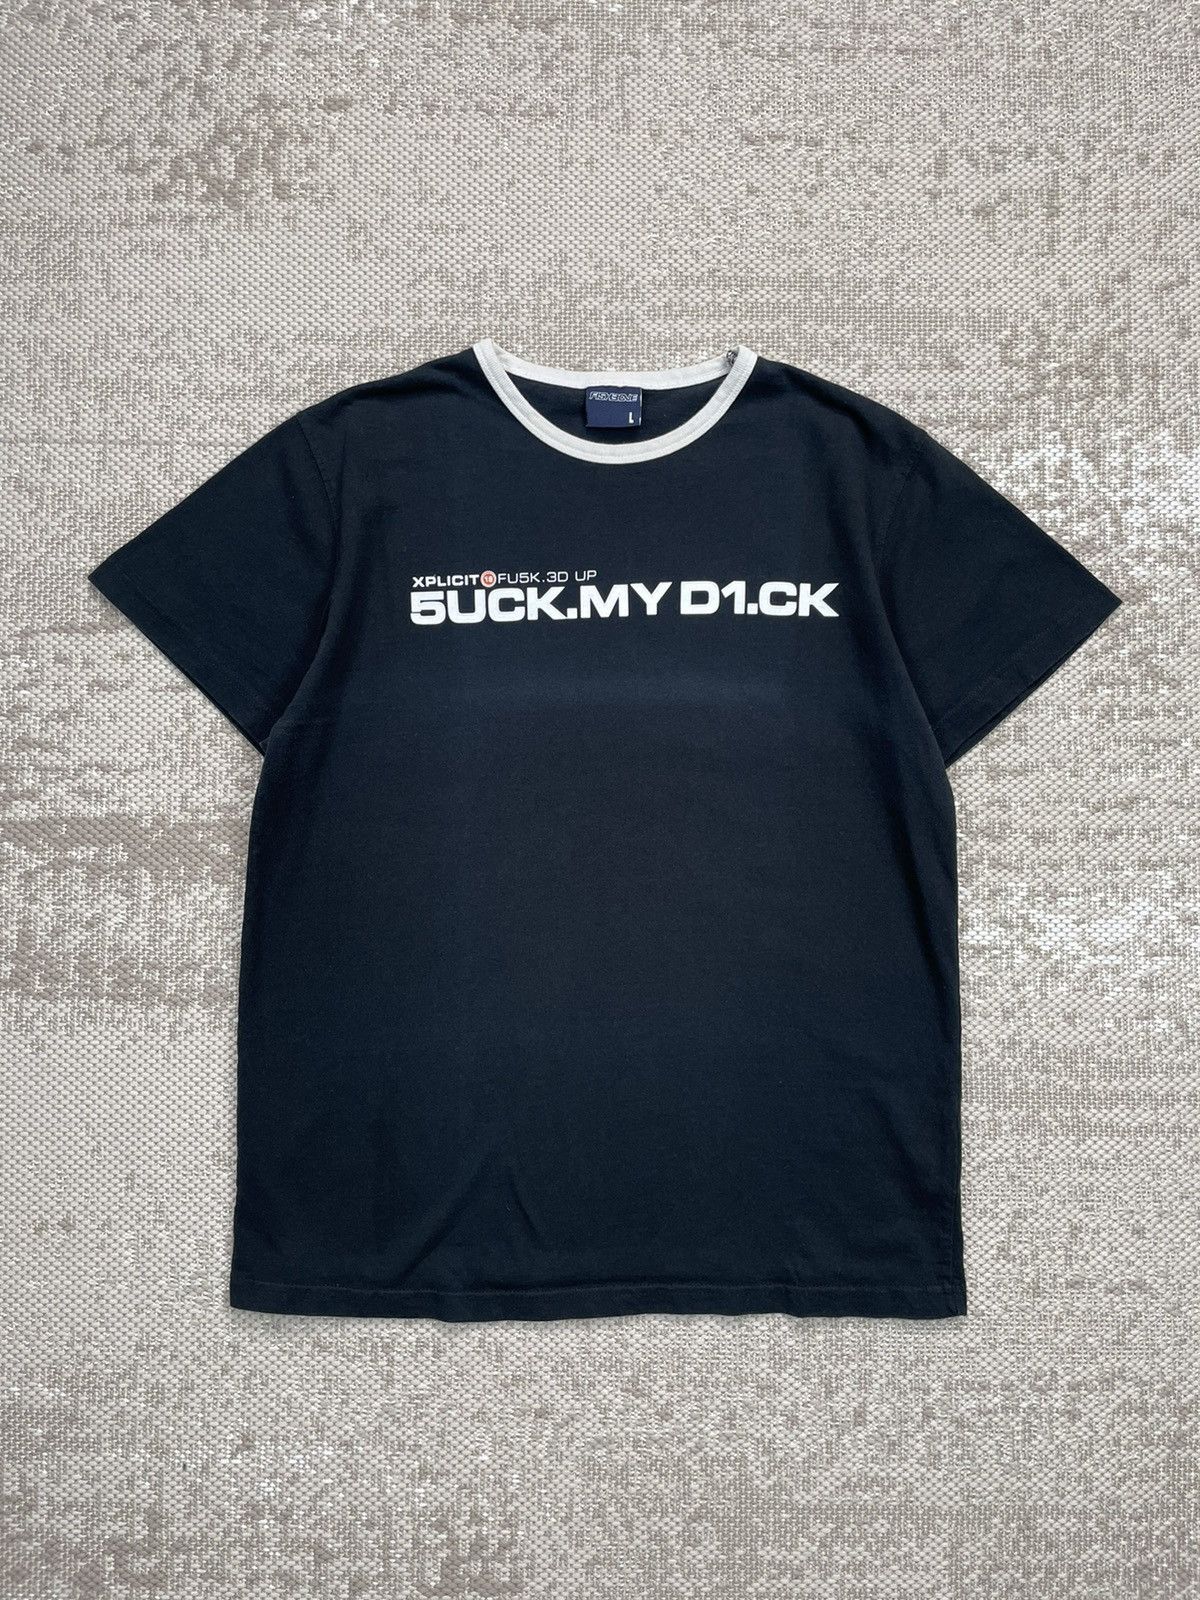 Vintage Vintage 5uck My d1ck T-shirt Suck my dick Central Cee 